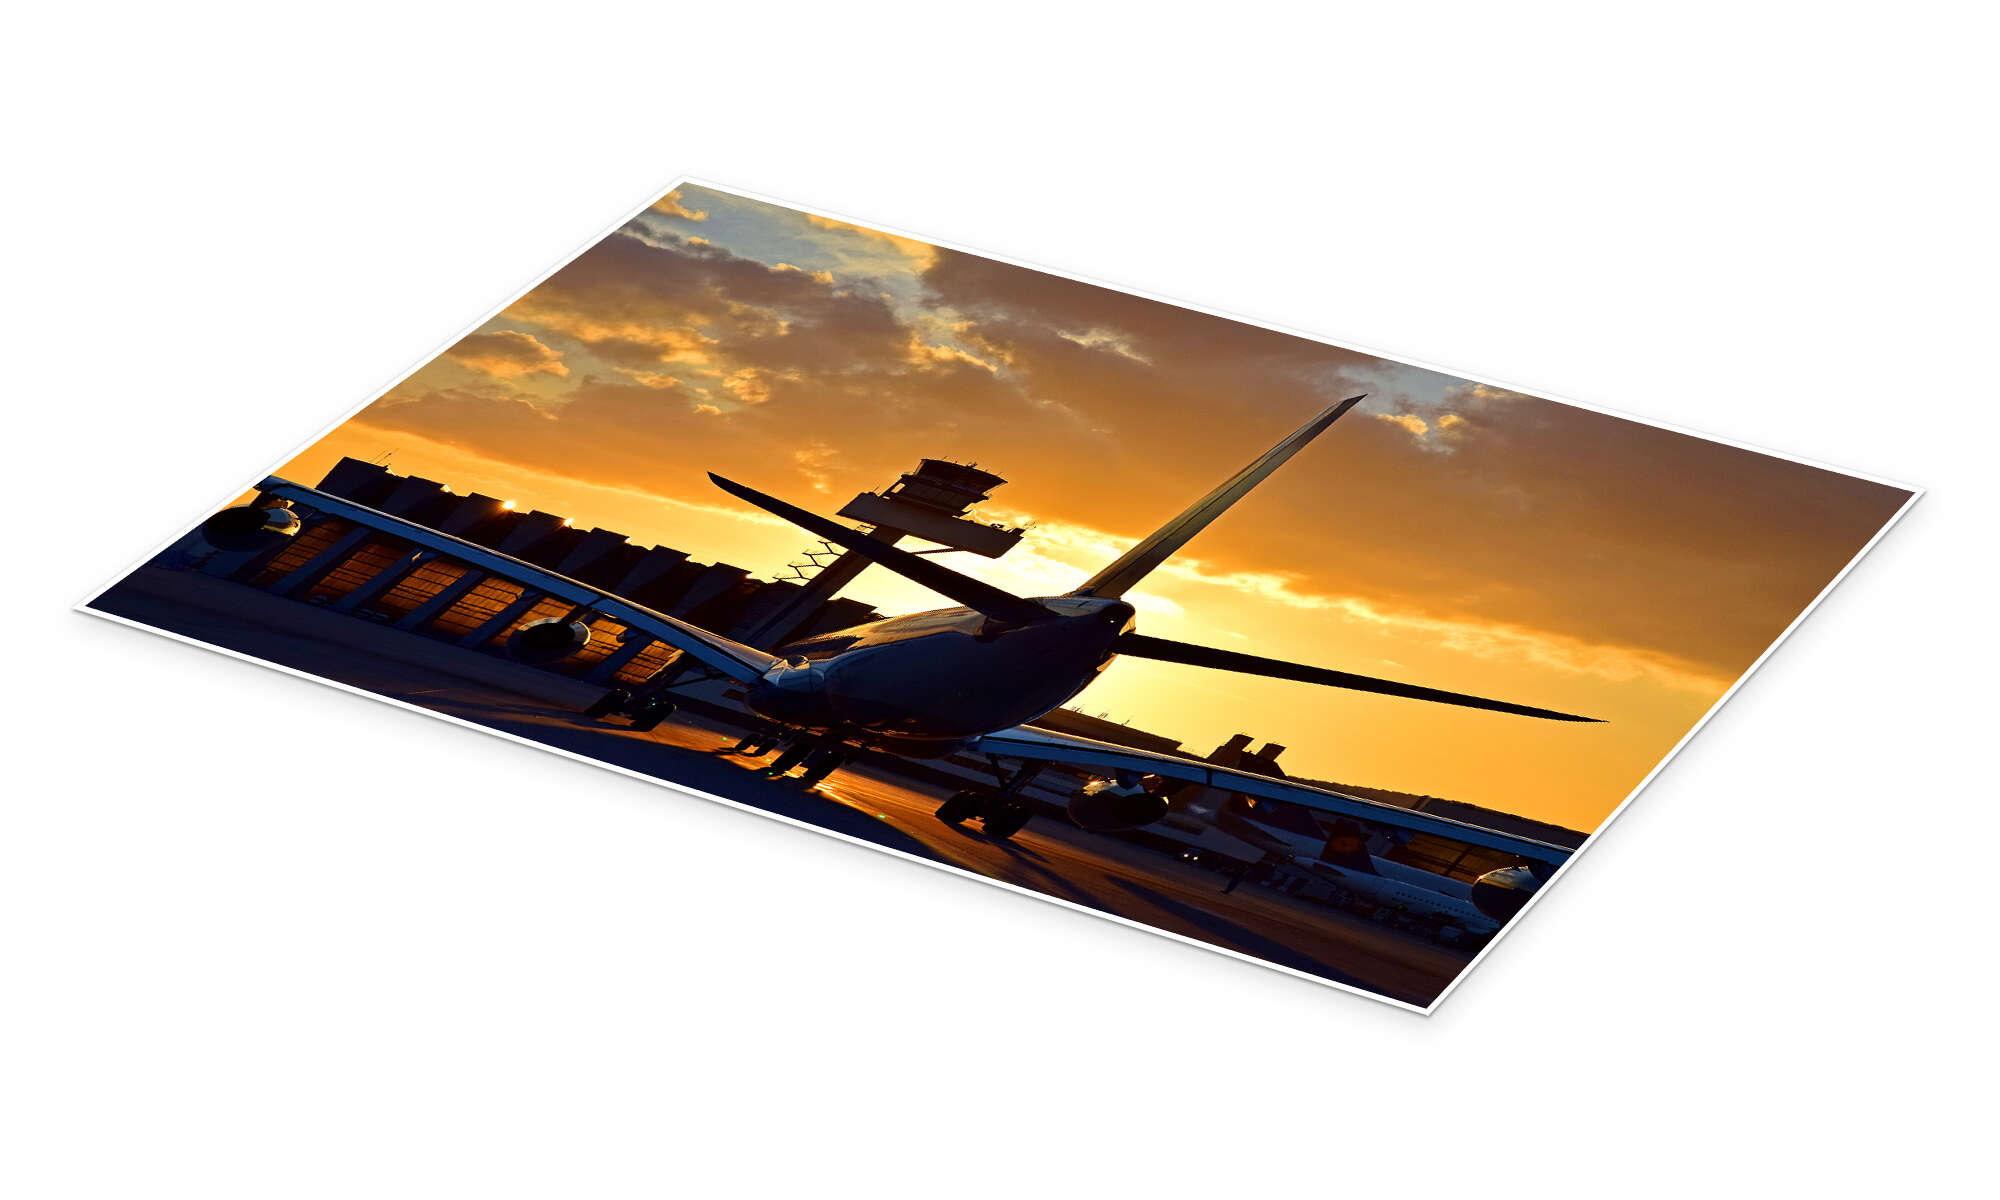 Airbus at the Frankfurt airport print by HADYPHOTO | Posterlounge